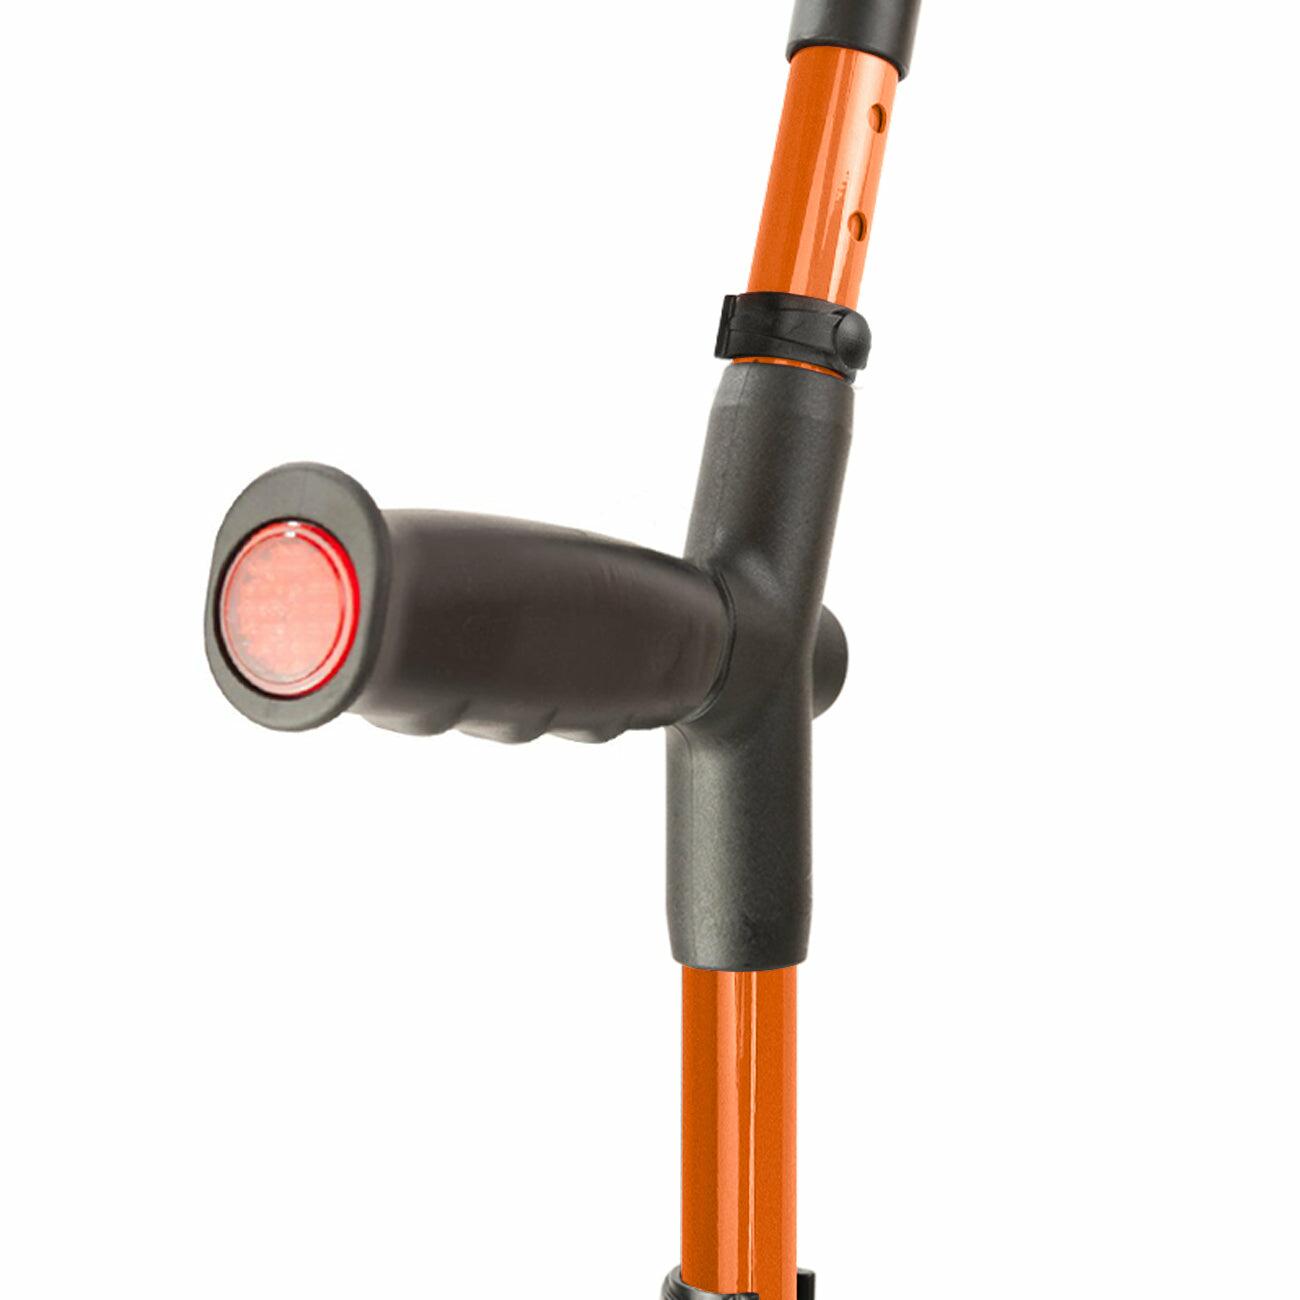 Soft grip handle of the Flexyfoot Soft Grip Double Adjustable Crutch